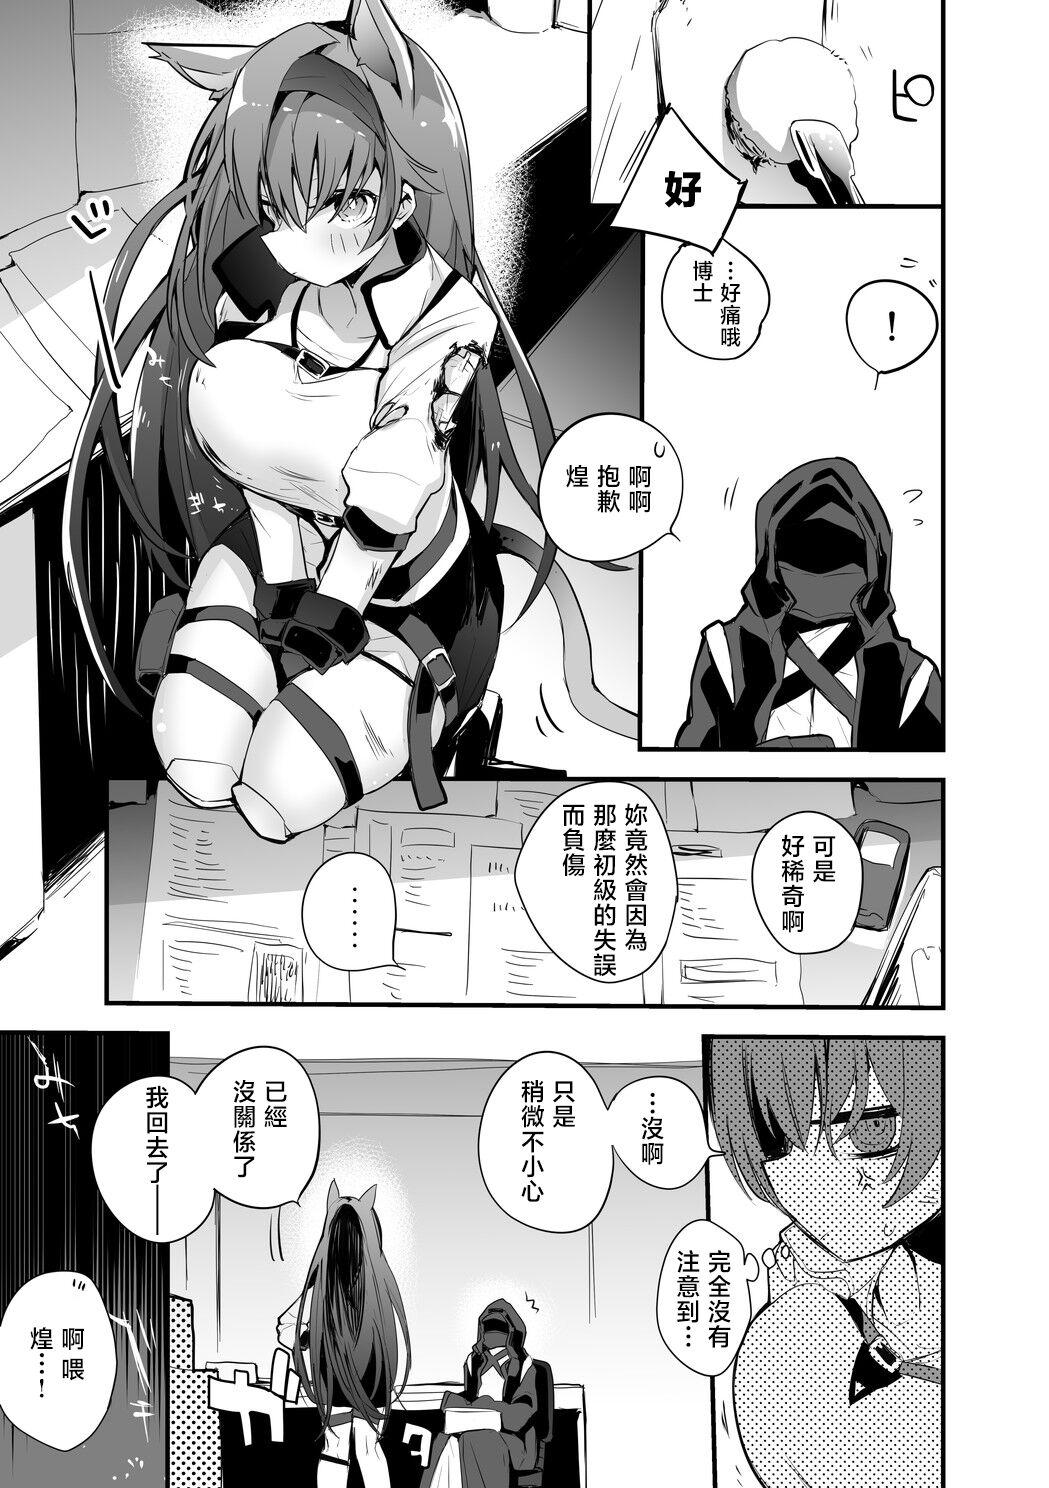 Tease ブレイズと乳契約編 - Arknights Harcore - Page 2